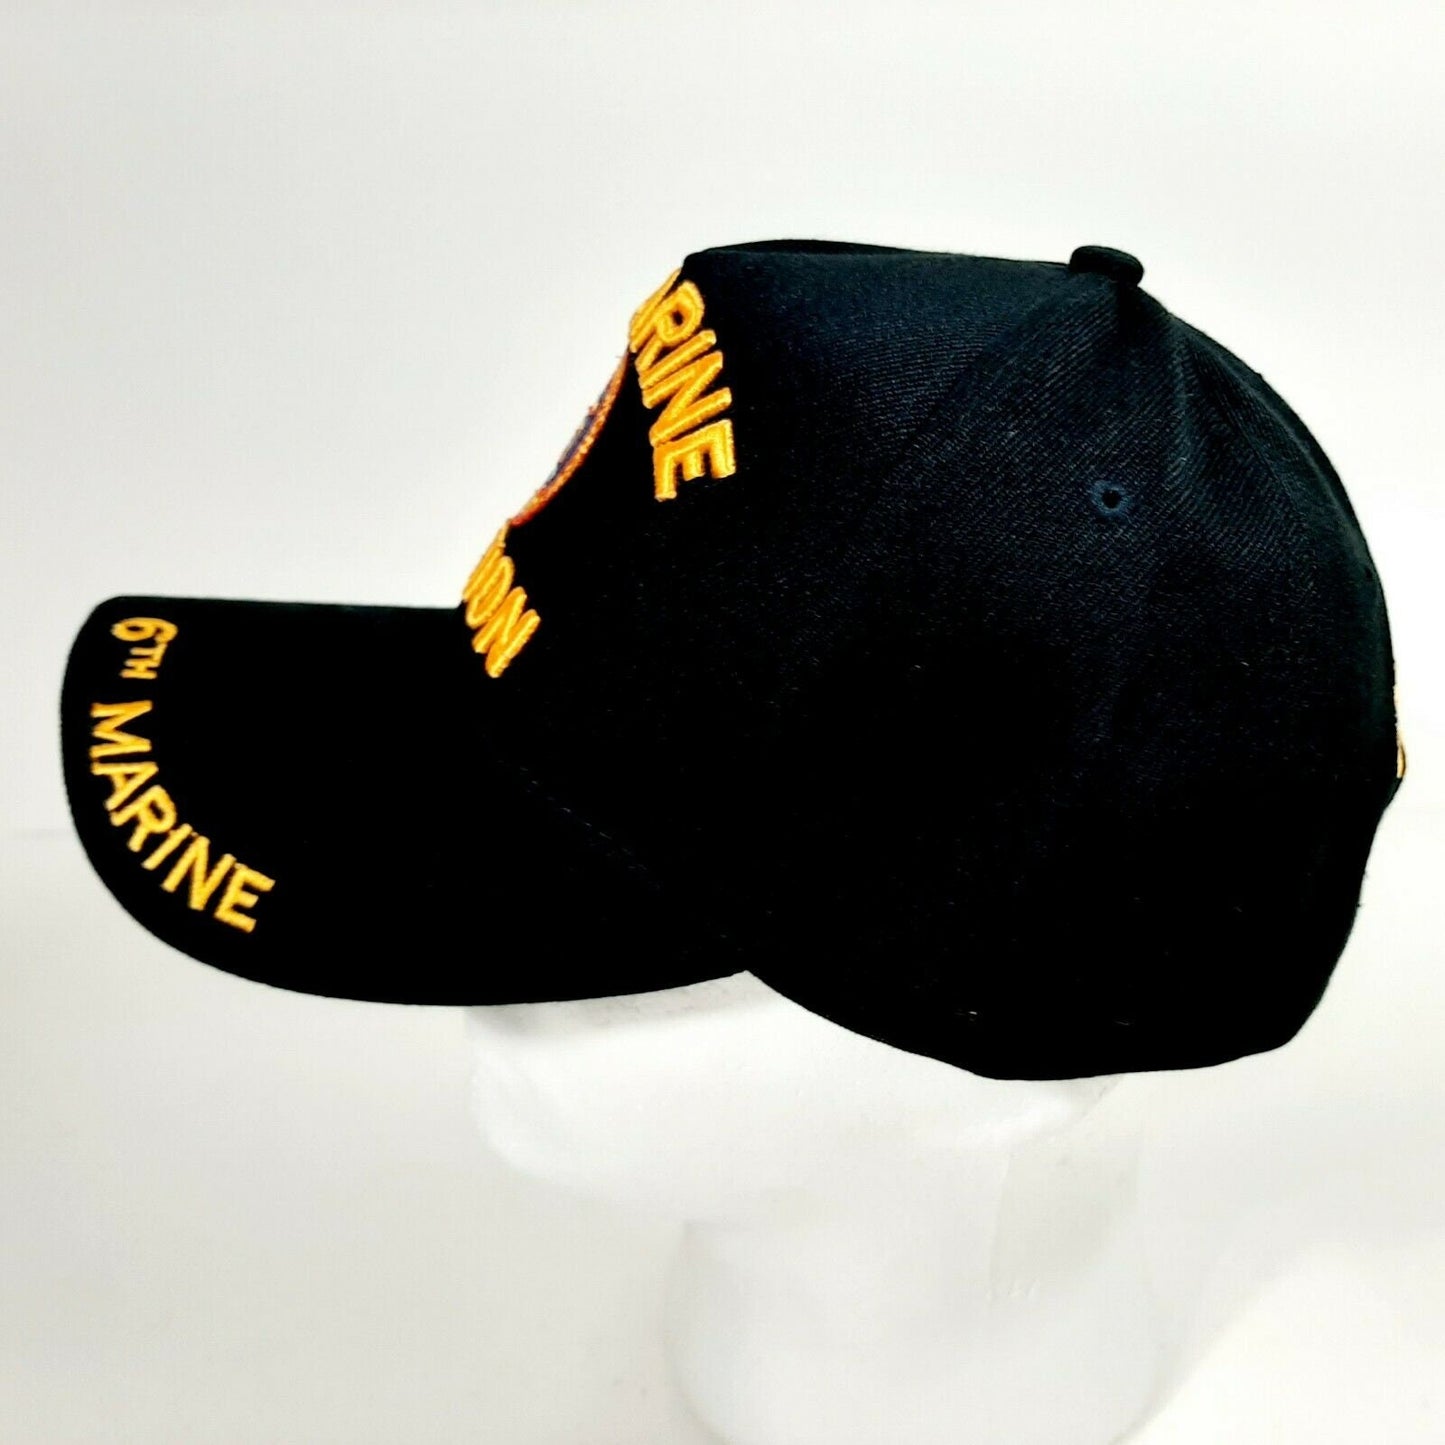 6th Marine Division Men's Ball Cap Hat Black Embroidered Acrylic